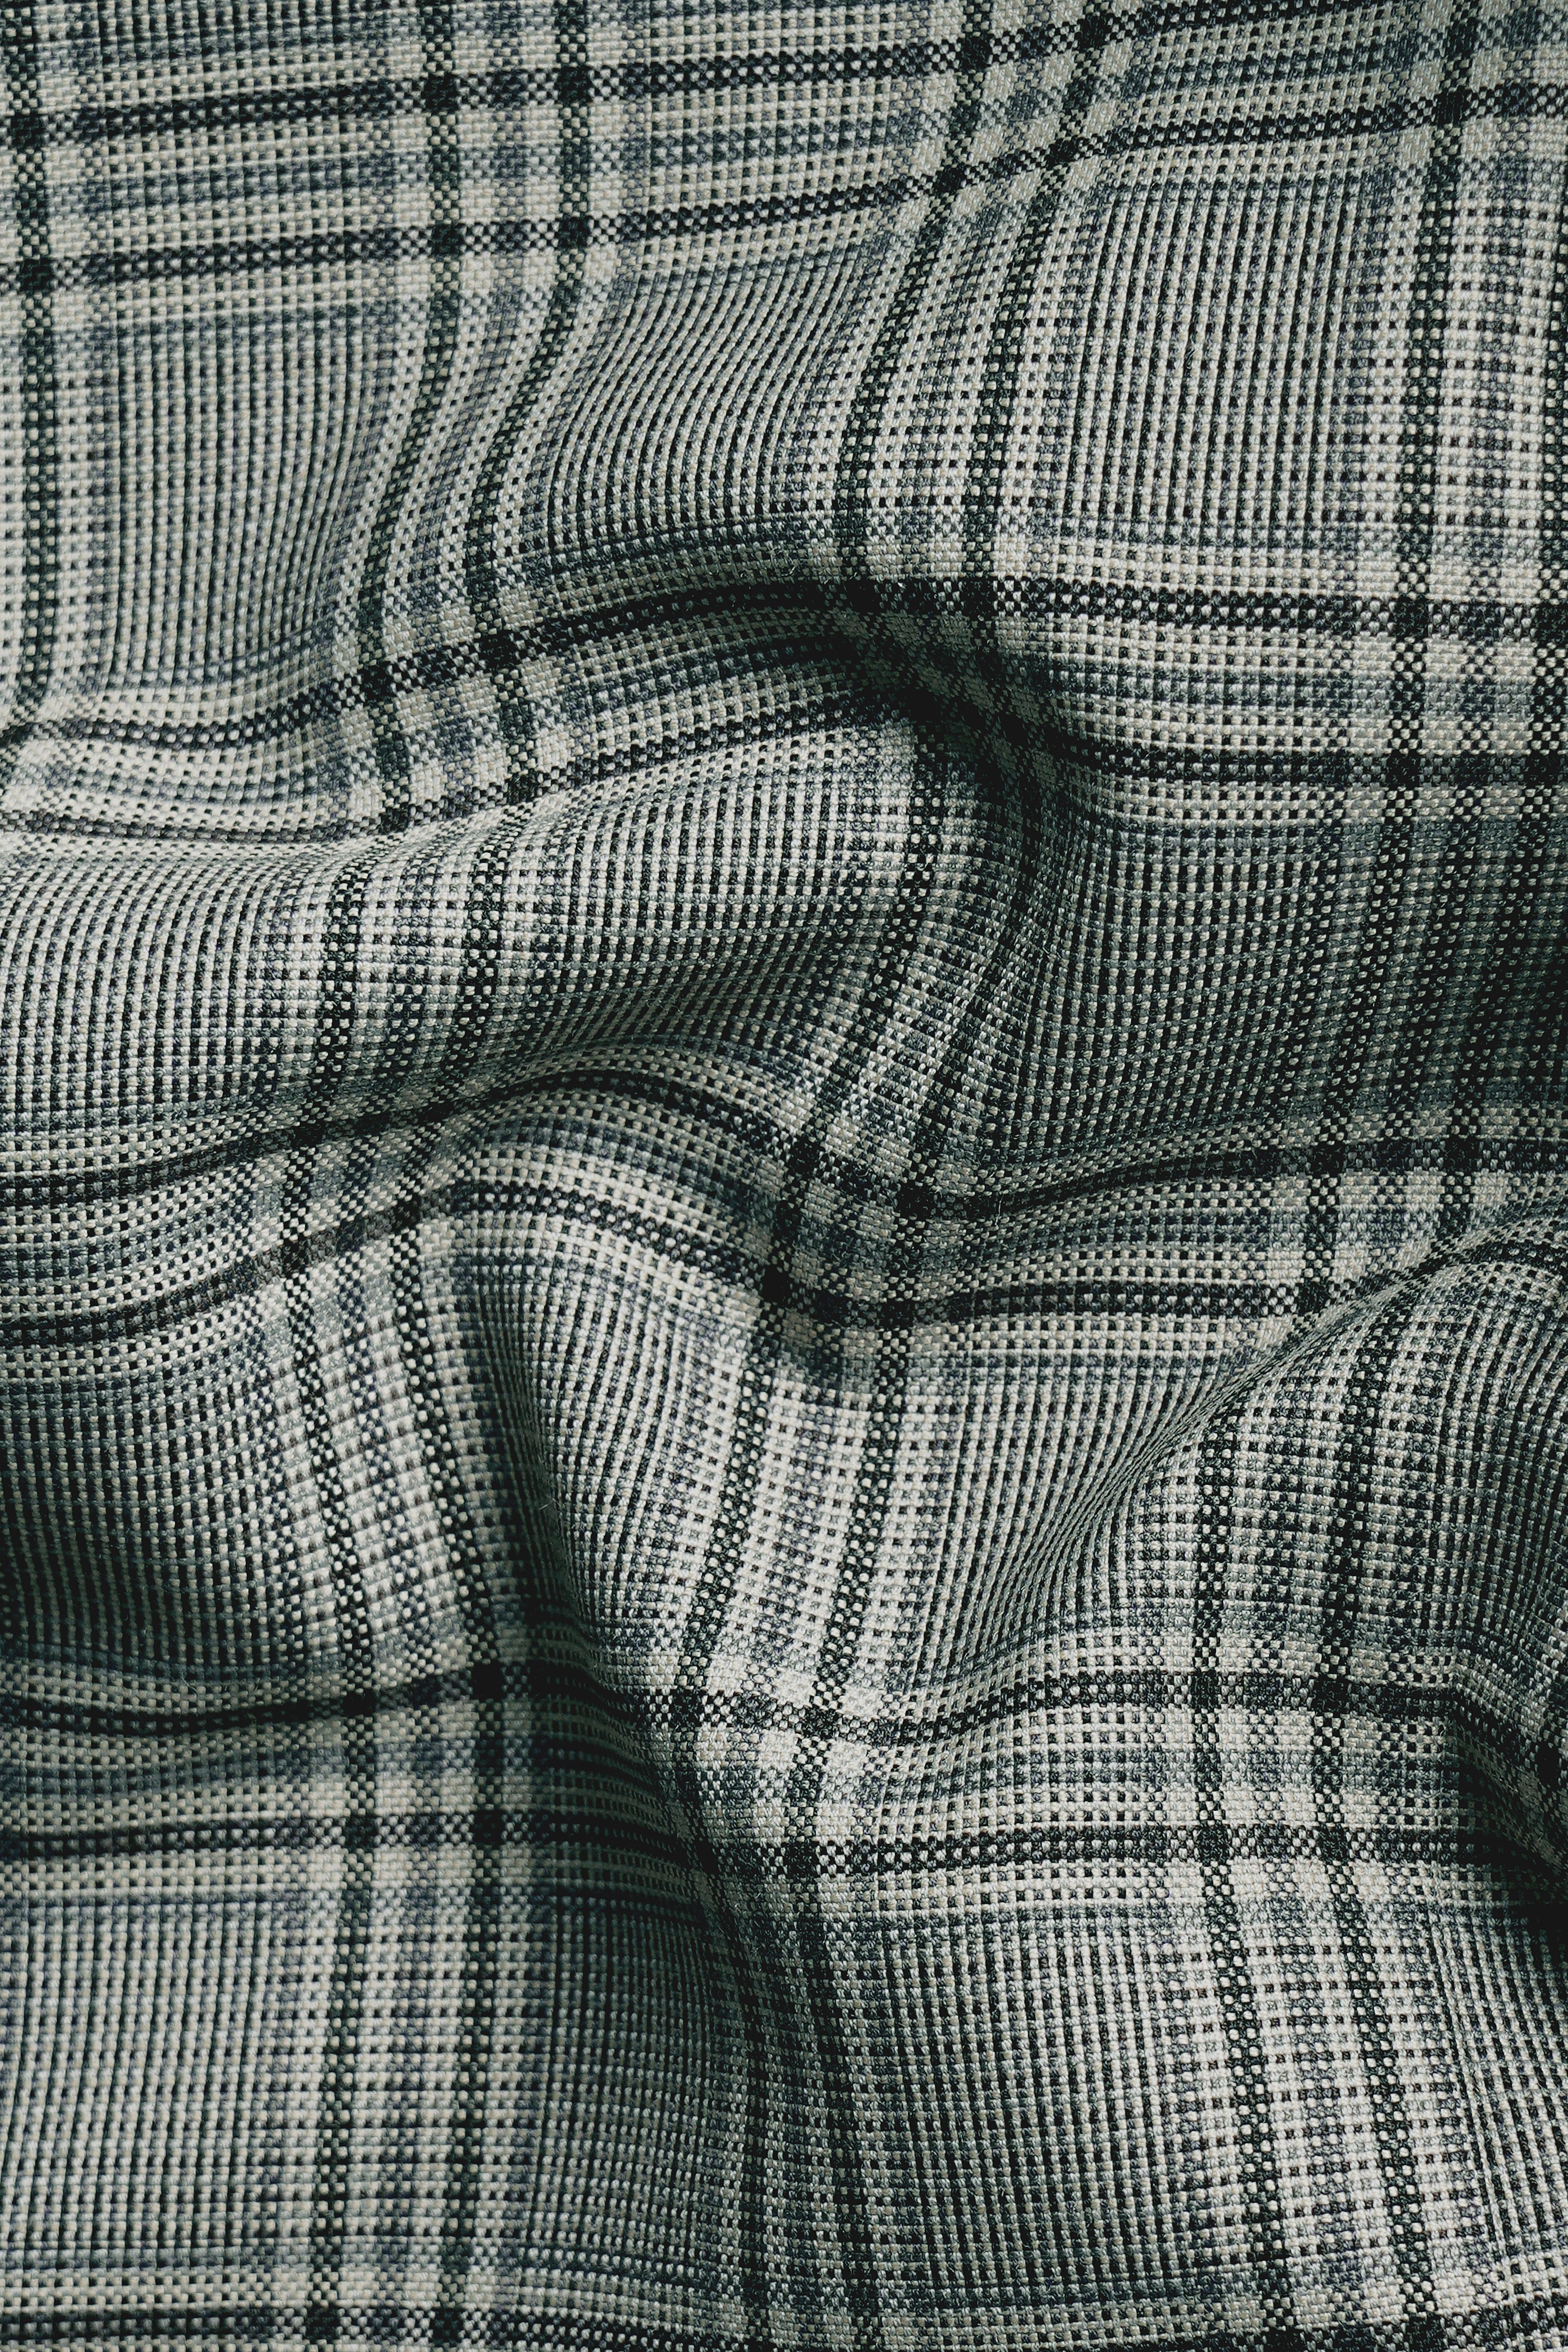 Flint Gray Plaid Wool Rich Double Breasted Designer Suit ST2754-DB4-BKL-D141-36,ST2754-DB4-BKL-D141-38,ST2754-DB4-BKL-D141-40,ST2754-DB4-BKL-D141-42,ST2754-DB4-BKL-D141-44,ST2754-DB4-BKL-D141-46,ST2754-DB4-BKL-D141-48,ST2754-DB4-BKL-D141-50,ST2754-DB4-BKL-D141-52,ST2754-DB4-BKL-D141-54,ST2754-DB4-BKL-D141-56,ST2754-DB4-BKL-D141-58,ST2754-DB4-BKL-D141-60